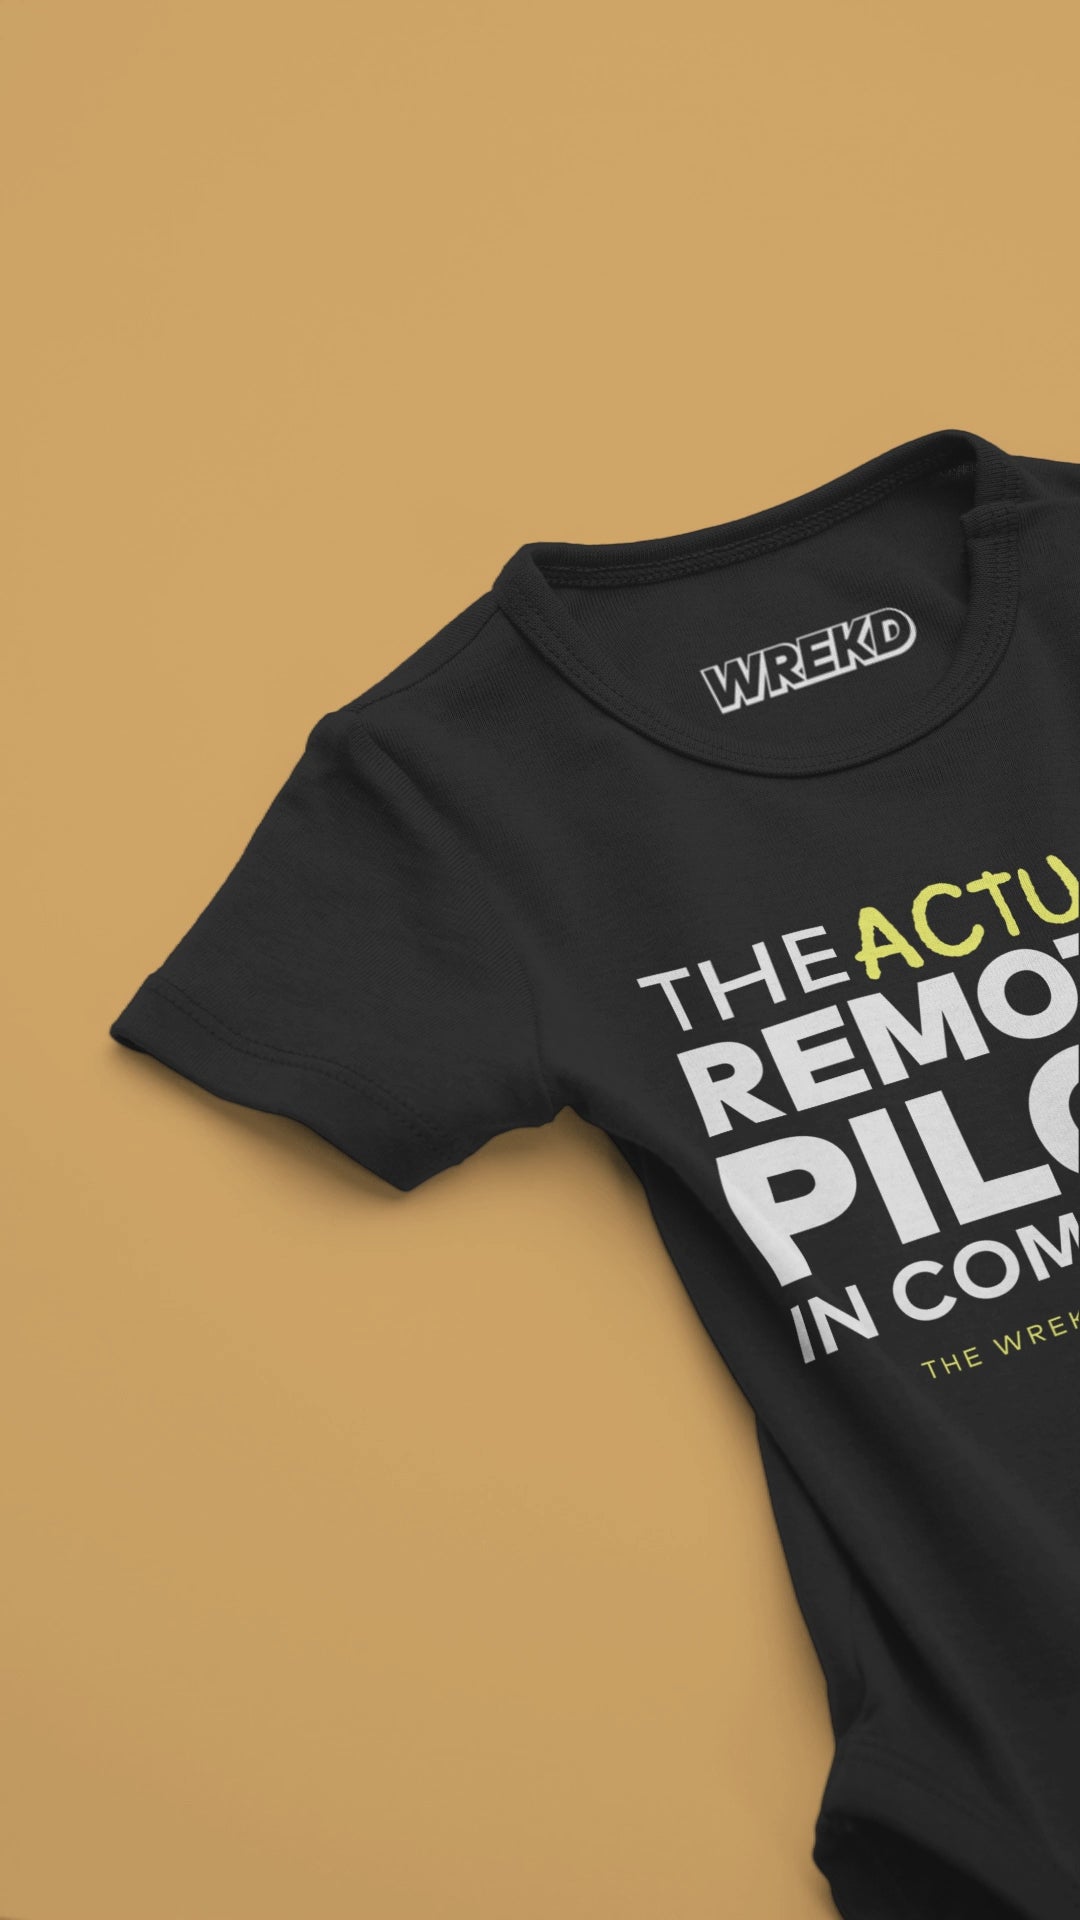 WREKD "The Actual Remote Pilot In Command" Onesie by WREKD Co.